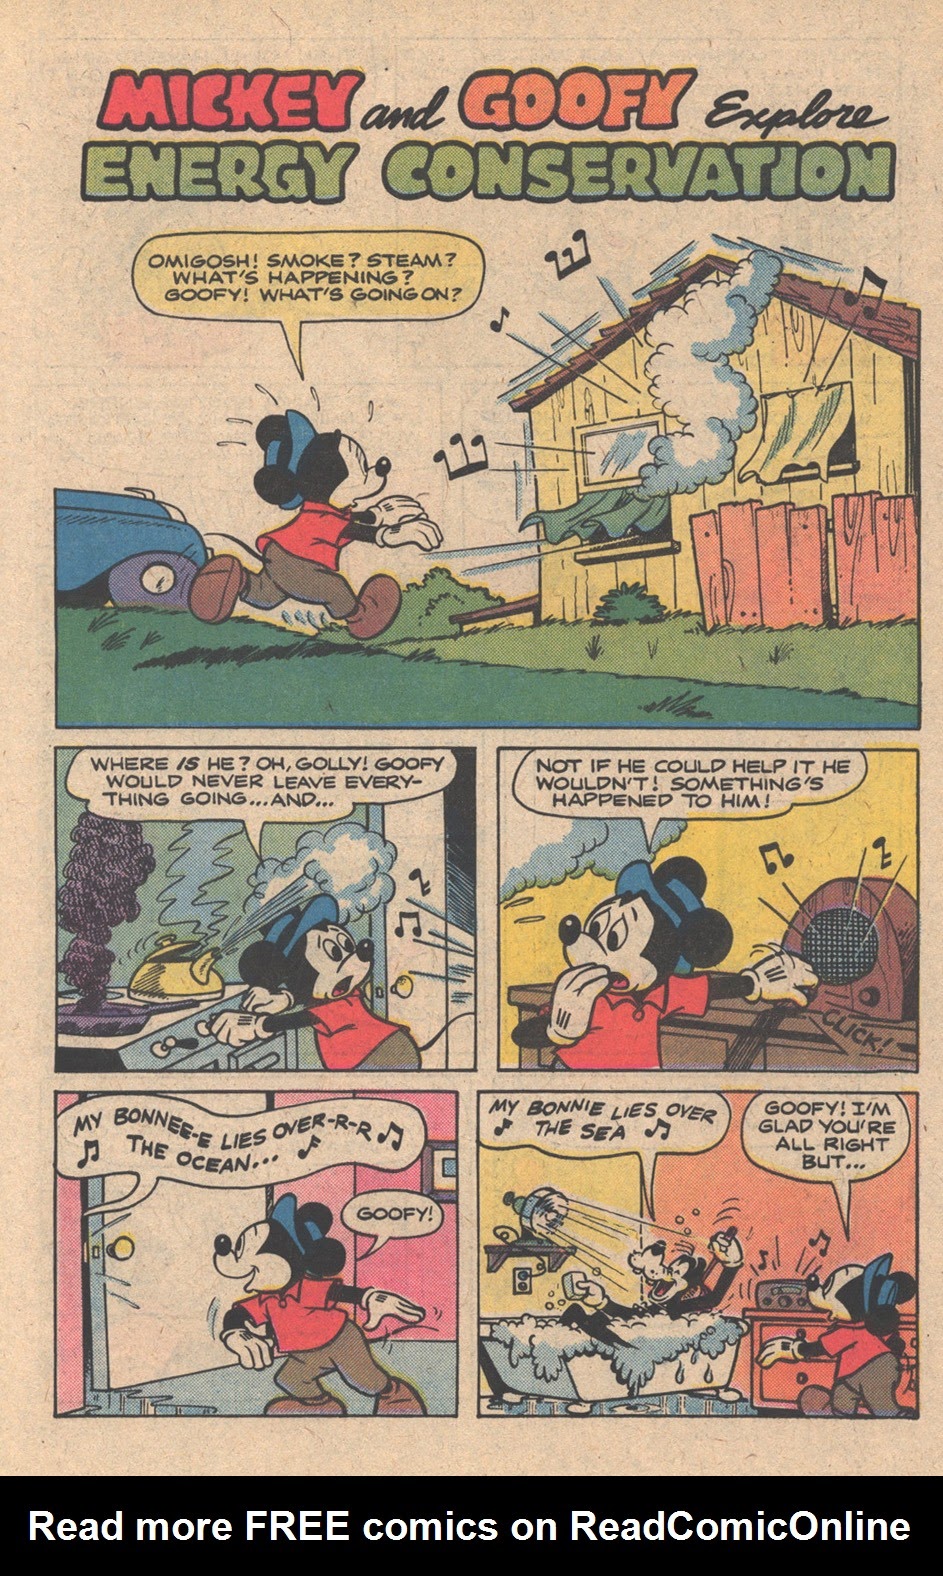 Read online Mickey Mouse and Goofy Explore Energy Conservation comic -  Issue # Full - 5